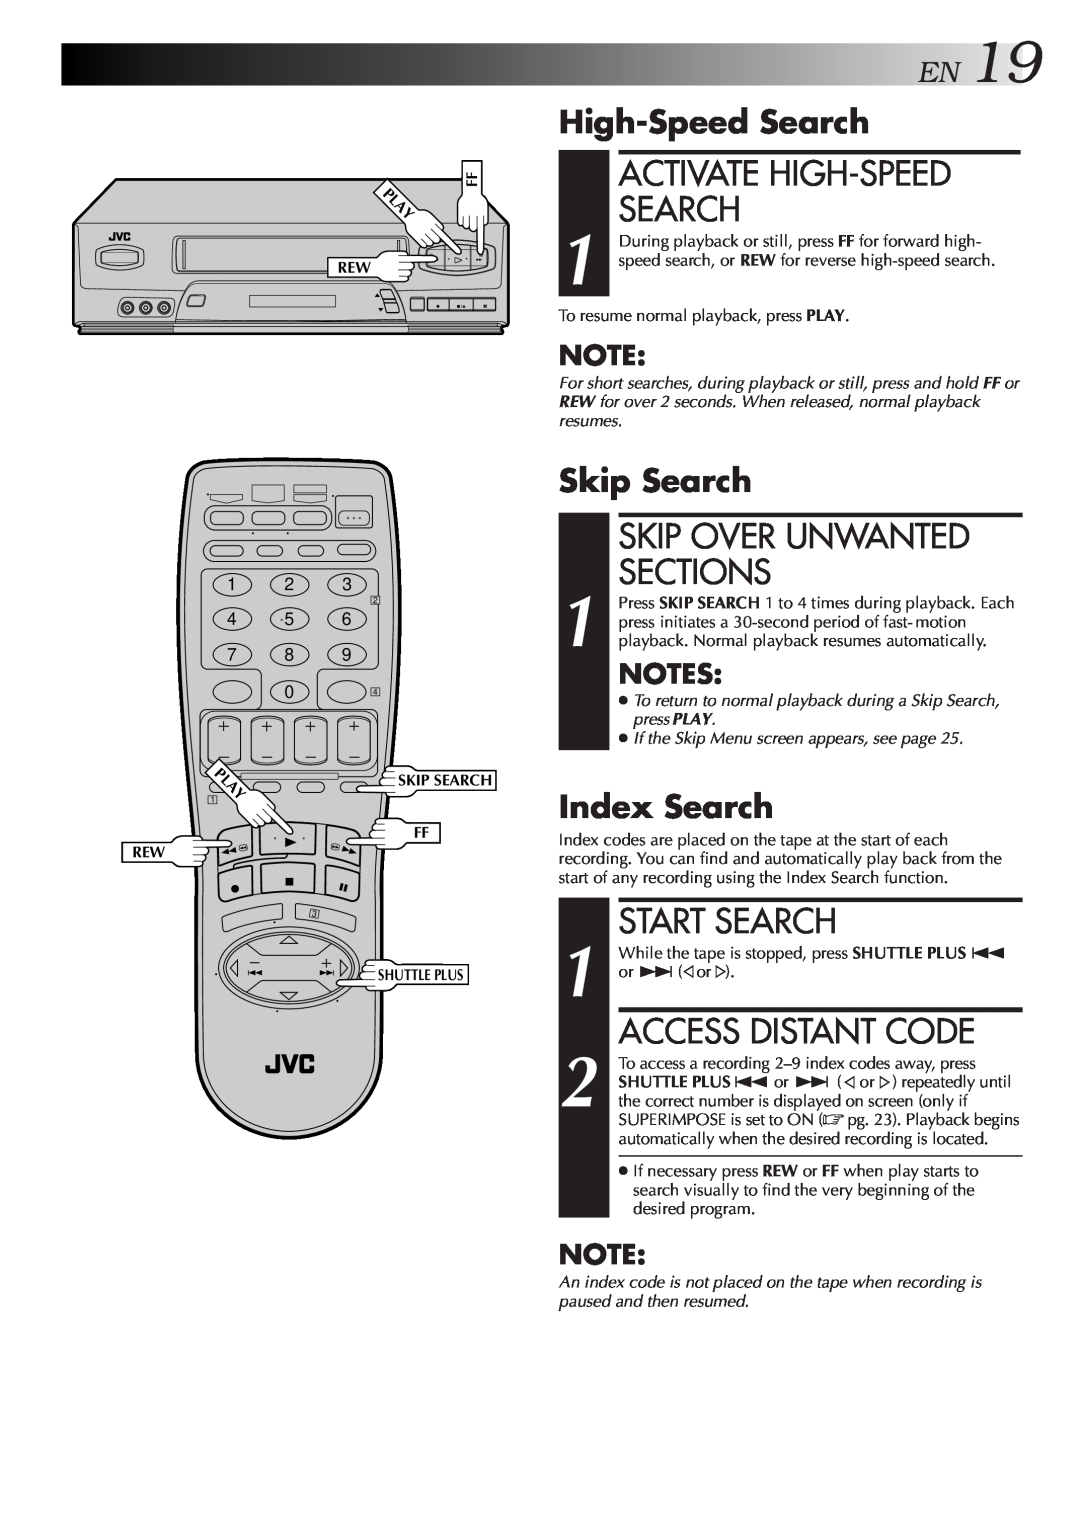 JVC HR-VP450U, HR-VP650U EN19, Activate High-Speed Search, Skip Over Unwanted Sections, Start Search, Access Distant Code 